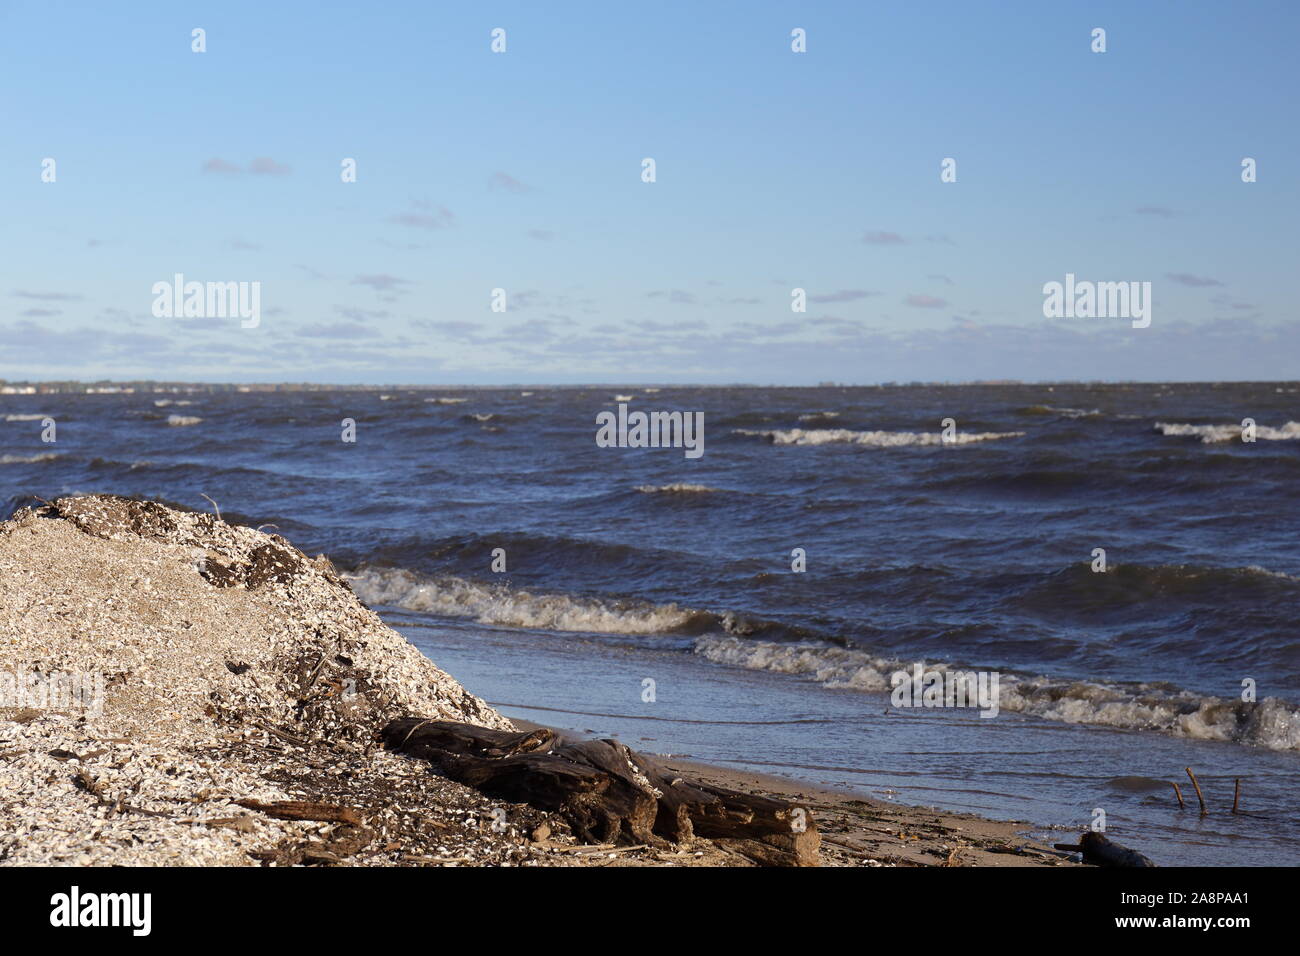 A large mound on a beach in the Great Lakes covered with invasive zebra mussel shells Stock Photo